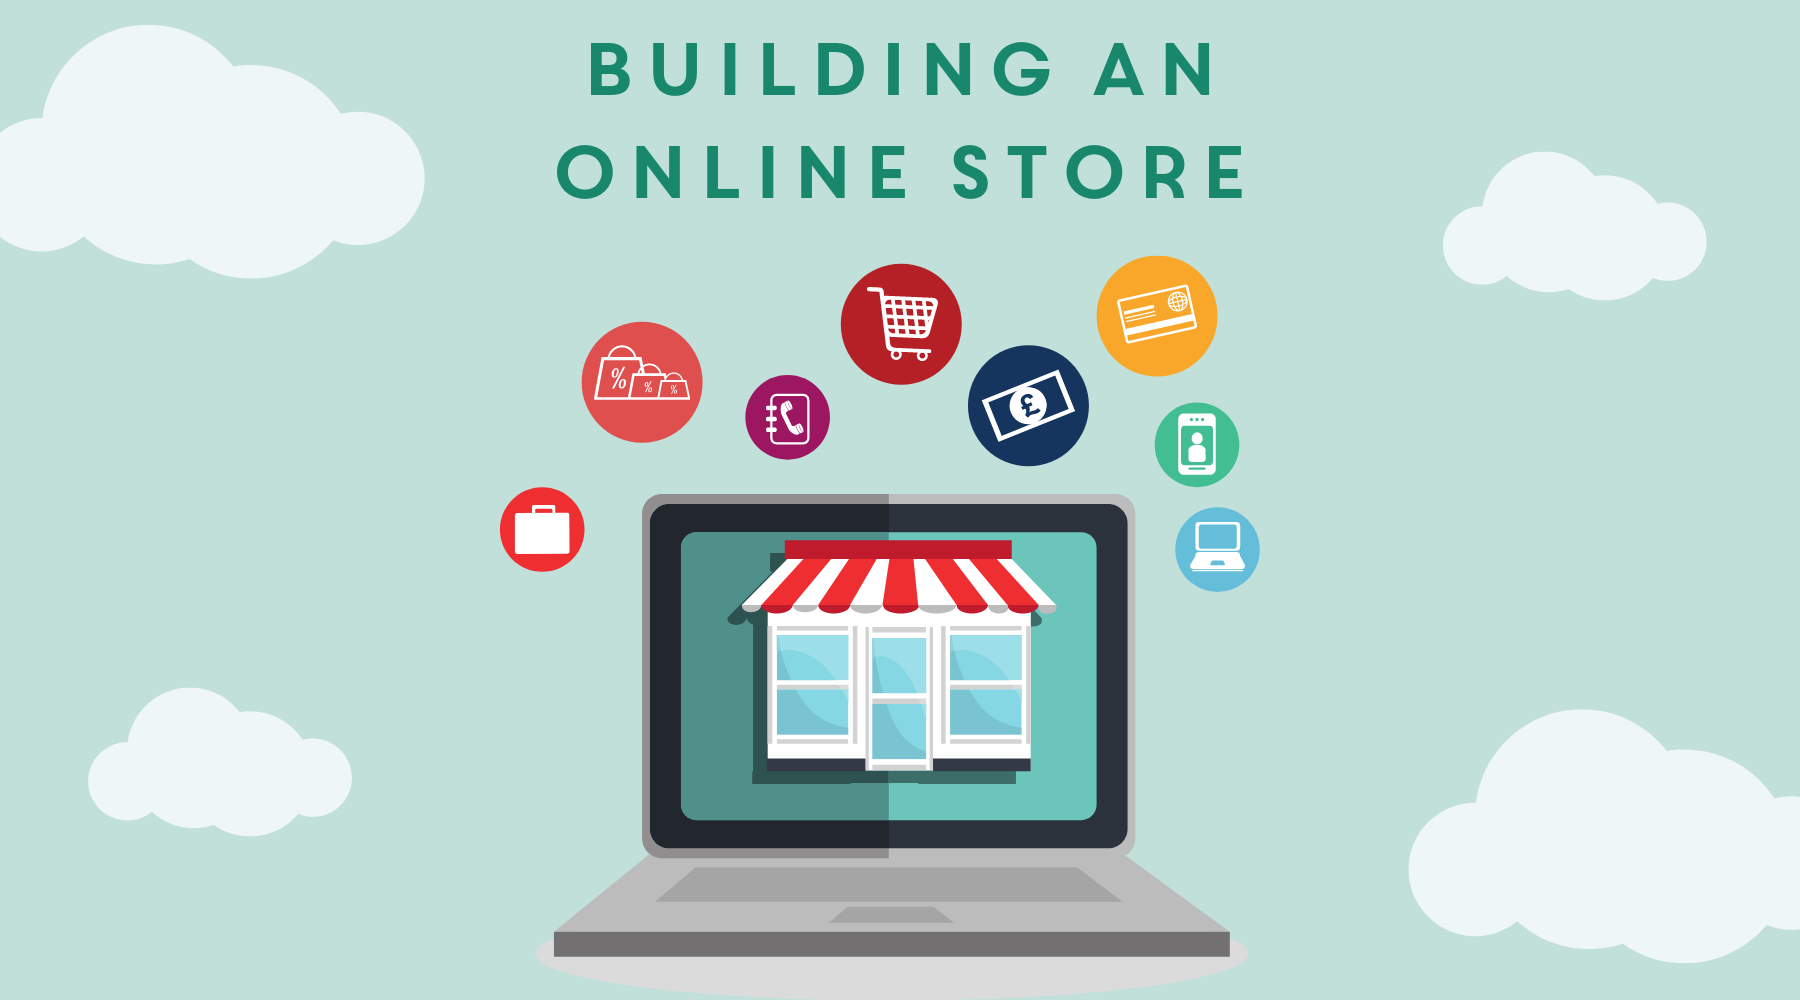 Factors to consider when building an online store.